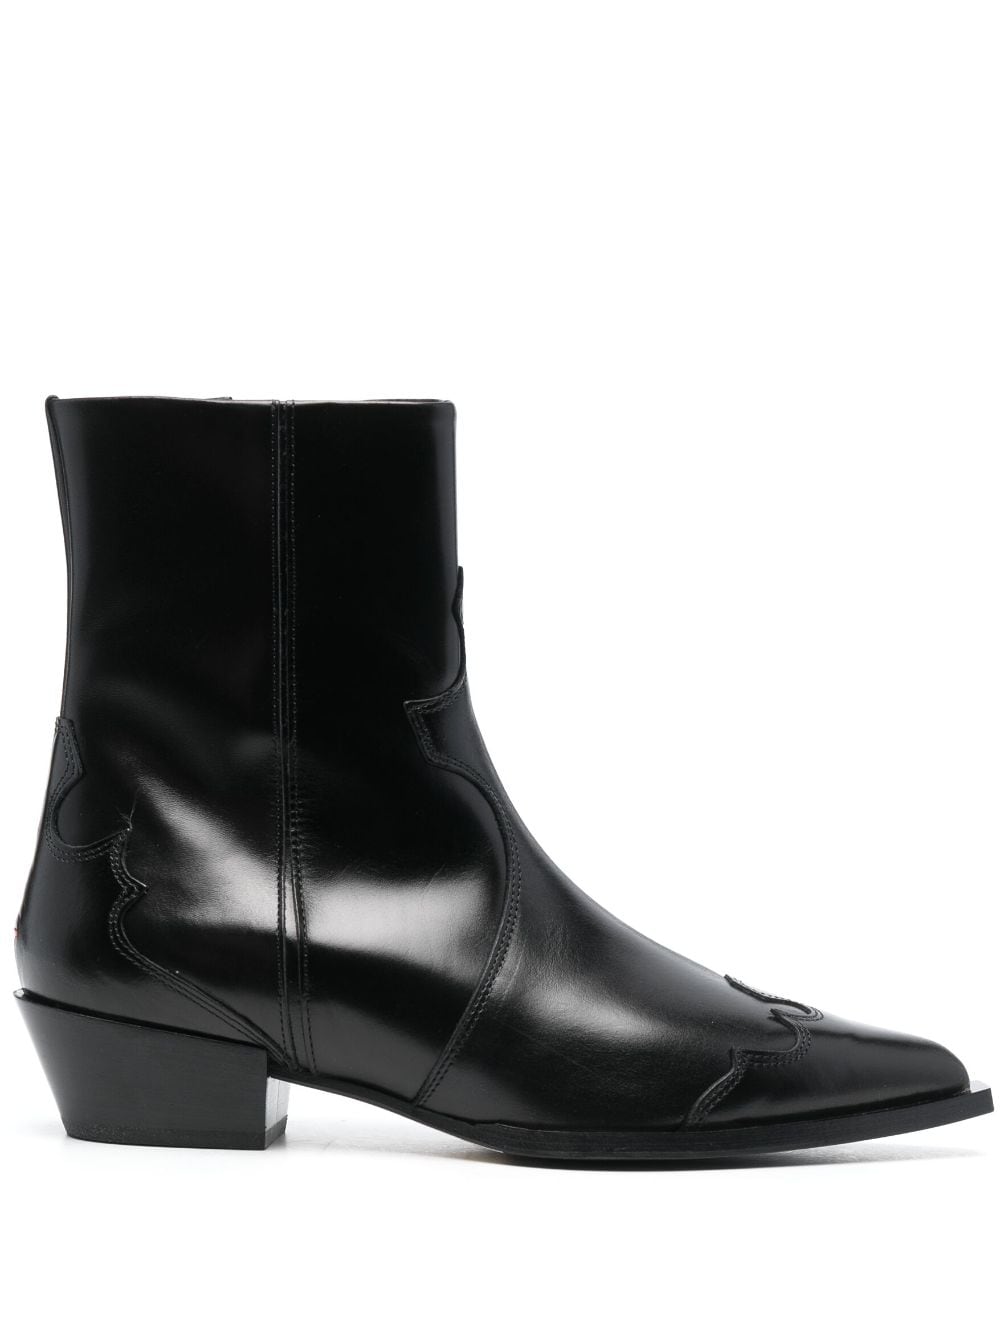 Aeyde Alby 30mm pointed-toe leather boots - Black von Aeyde